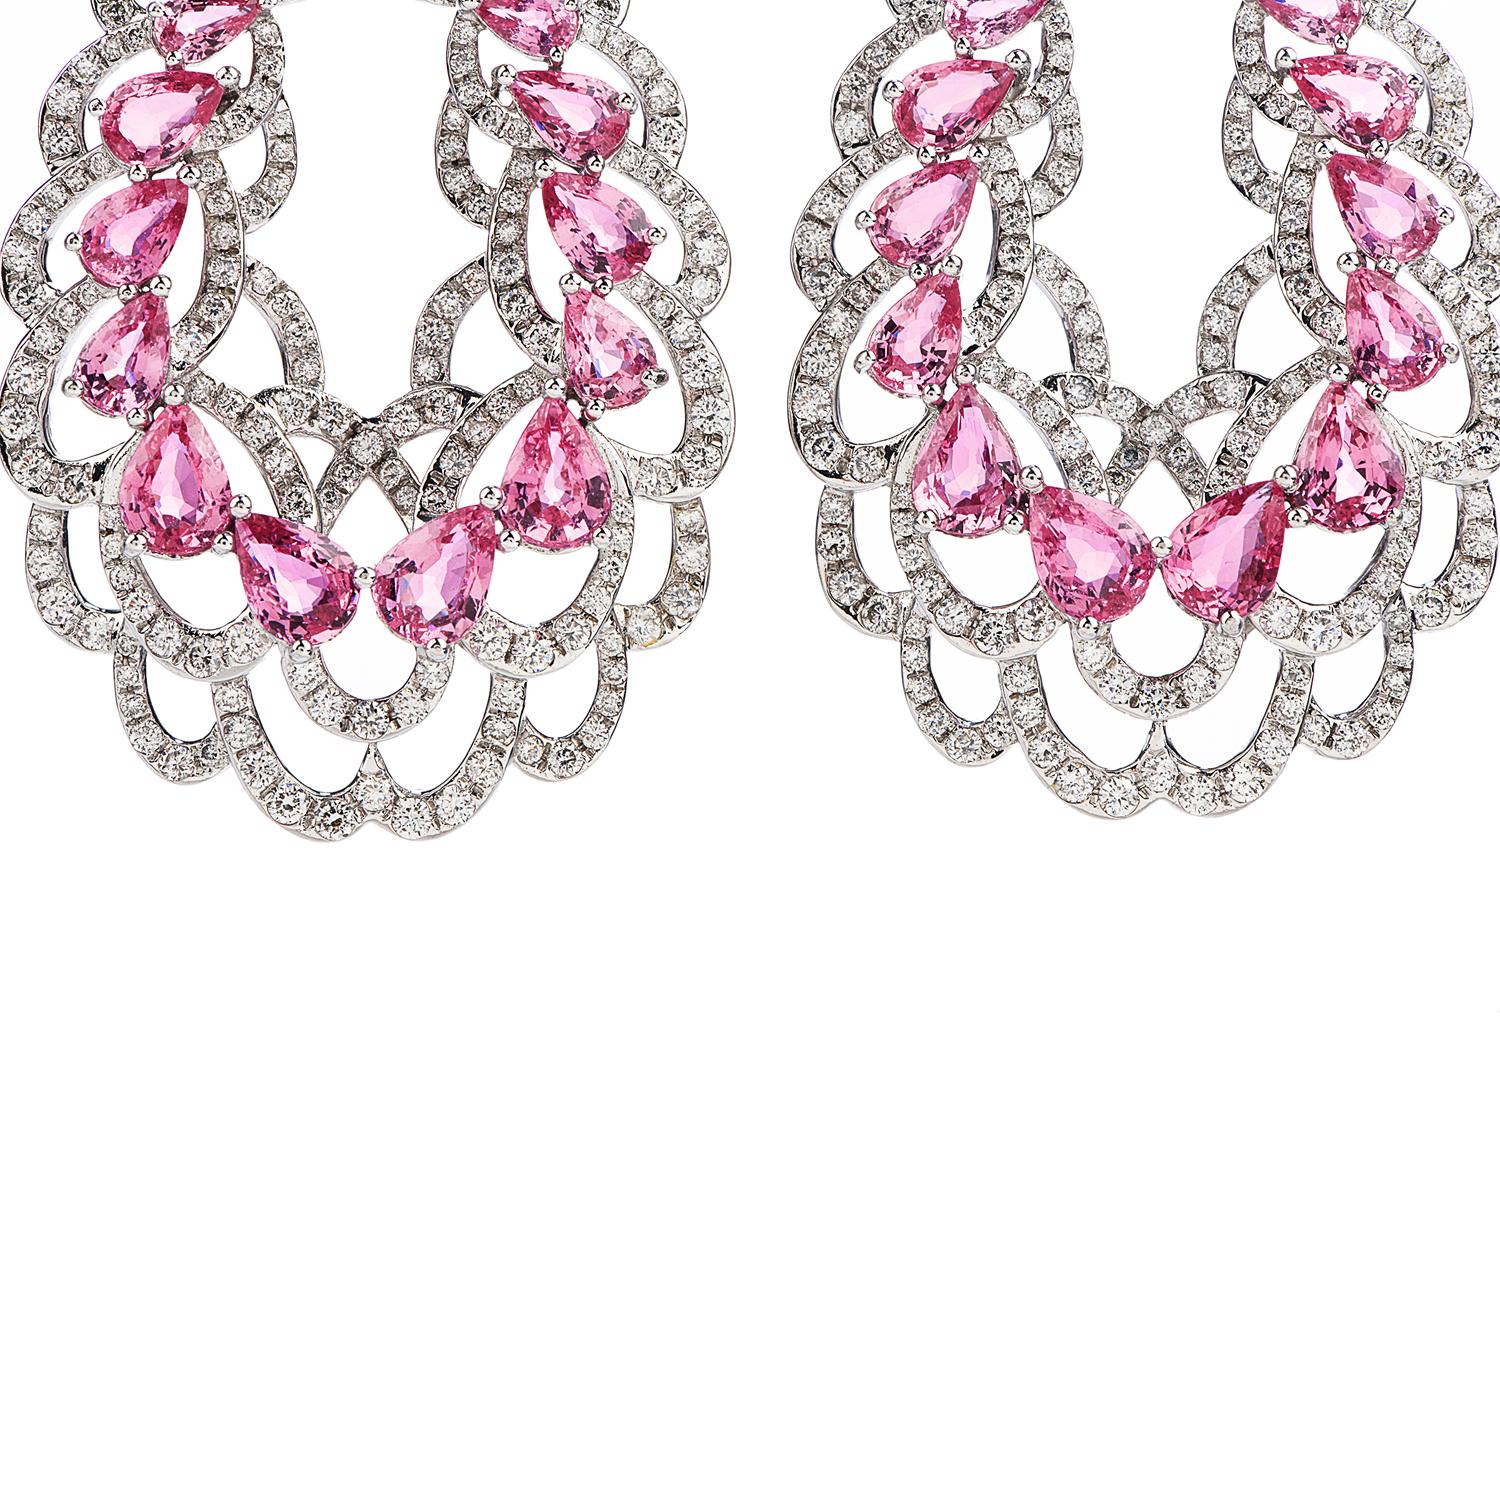 floral open design large dangle earrings, perfect for spring & summer.

Crafted in solid 18K white gold,

This piece has (36) Pink Sapphires, pear cut, prong set, weighing a total of approximately 16.48 carats,

Complimenting the look are 416